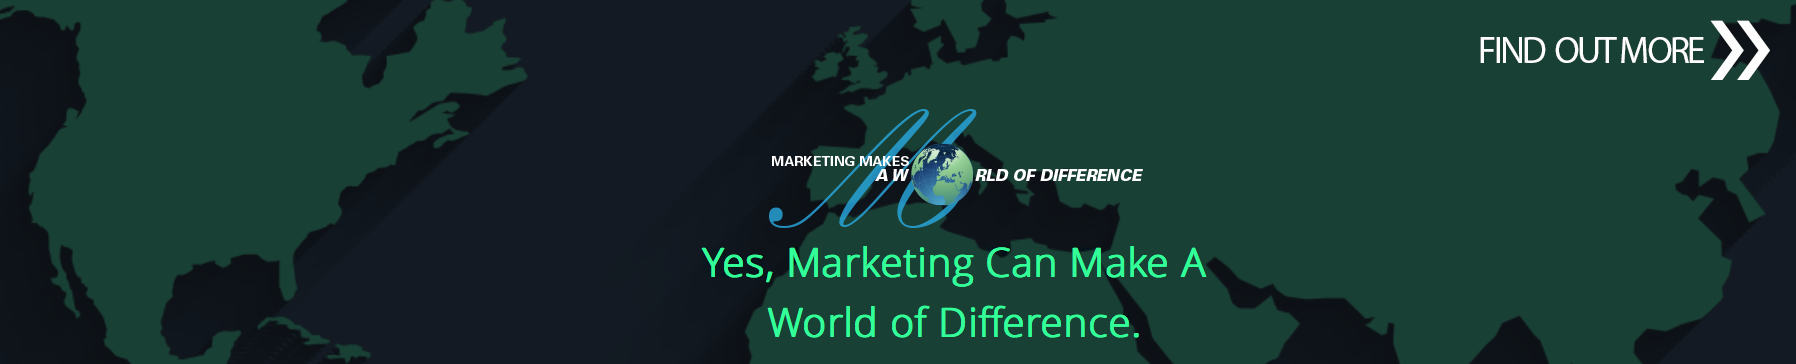 Marketing Makes a World of Difference